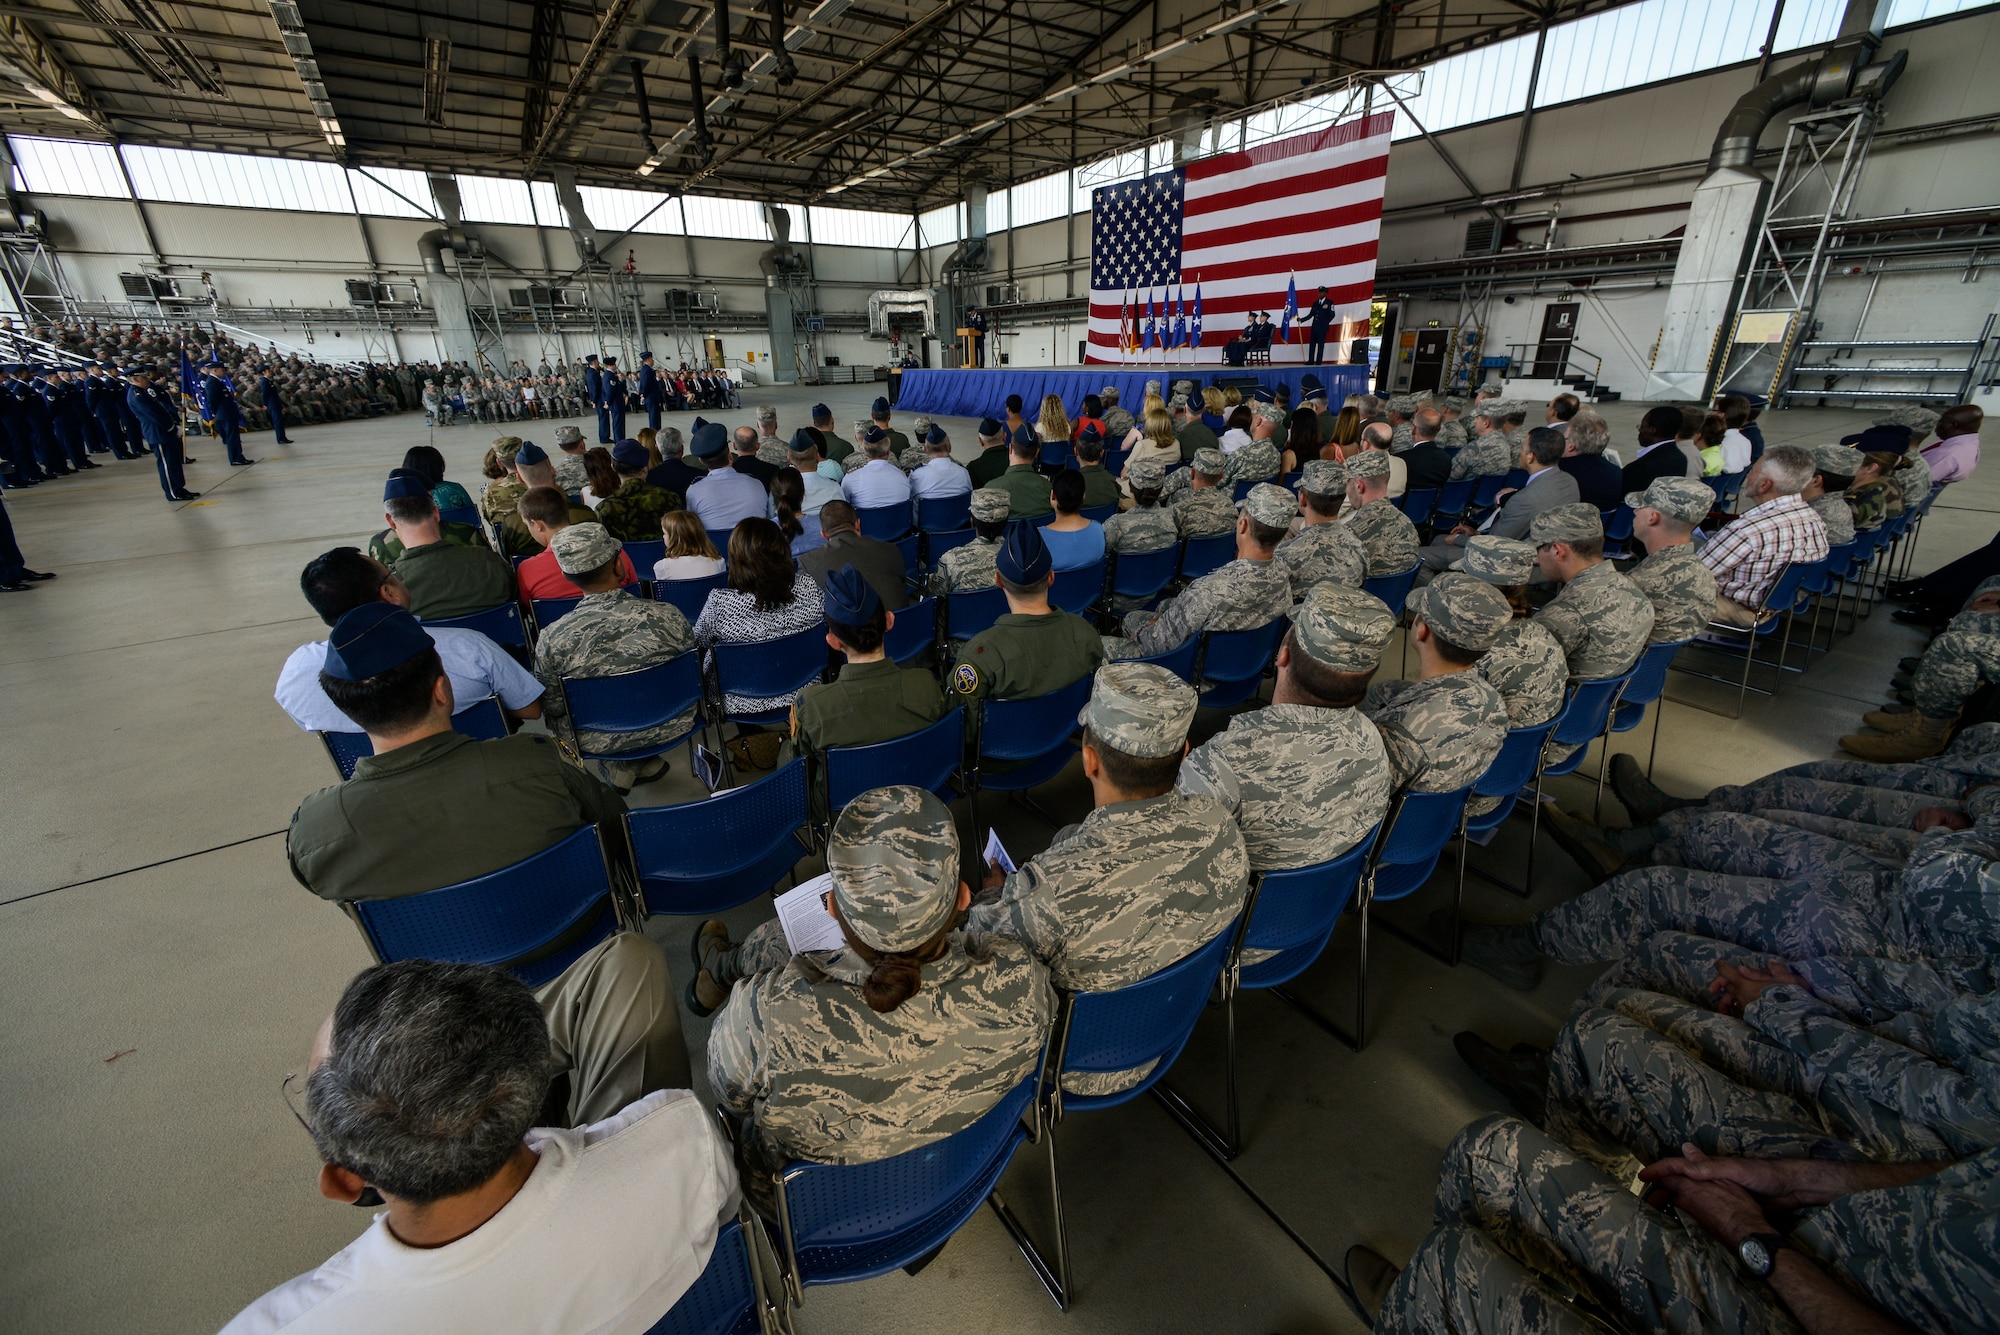 Airmen gather for the Third Air Force and 17th Expeditionary Air Force change of command ceremony July 2, 2015, at Ramstein Air Base, Germany. During the ceremony Lt. Gen. Darryl L. Roberson relinquished command to Lt. Gen. Timothy M. Ray. (U.S. Air Force photo/Senior Airman Nicole Sikorski)